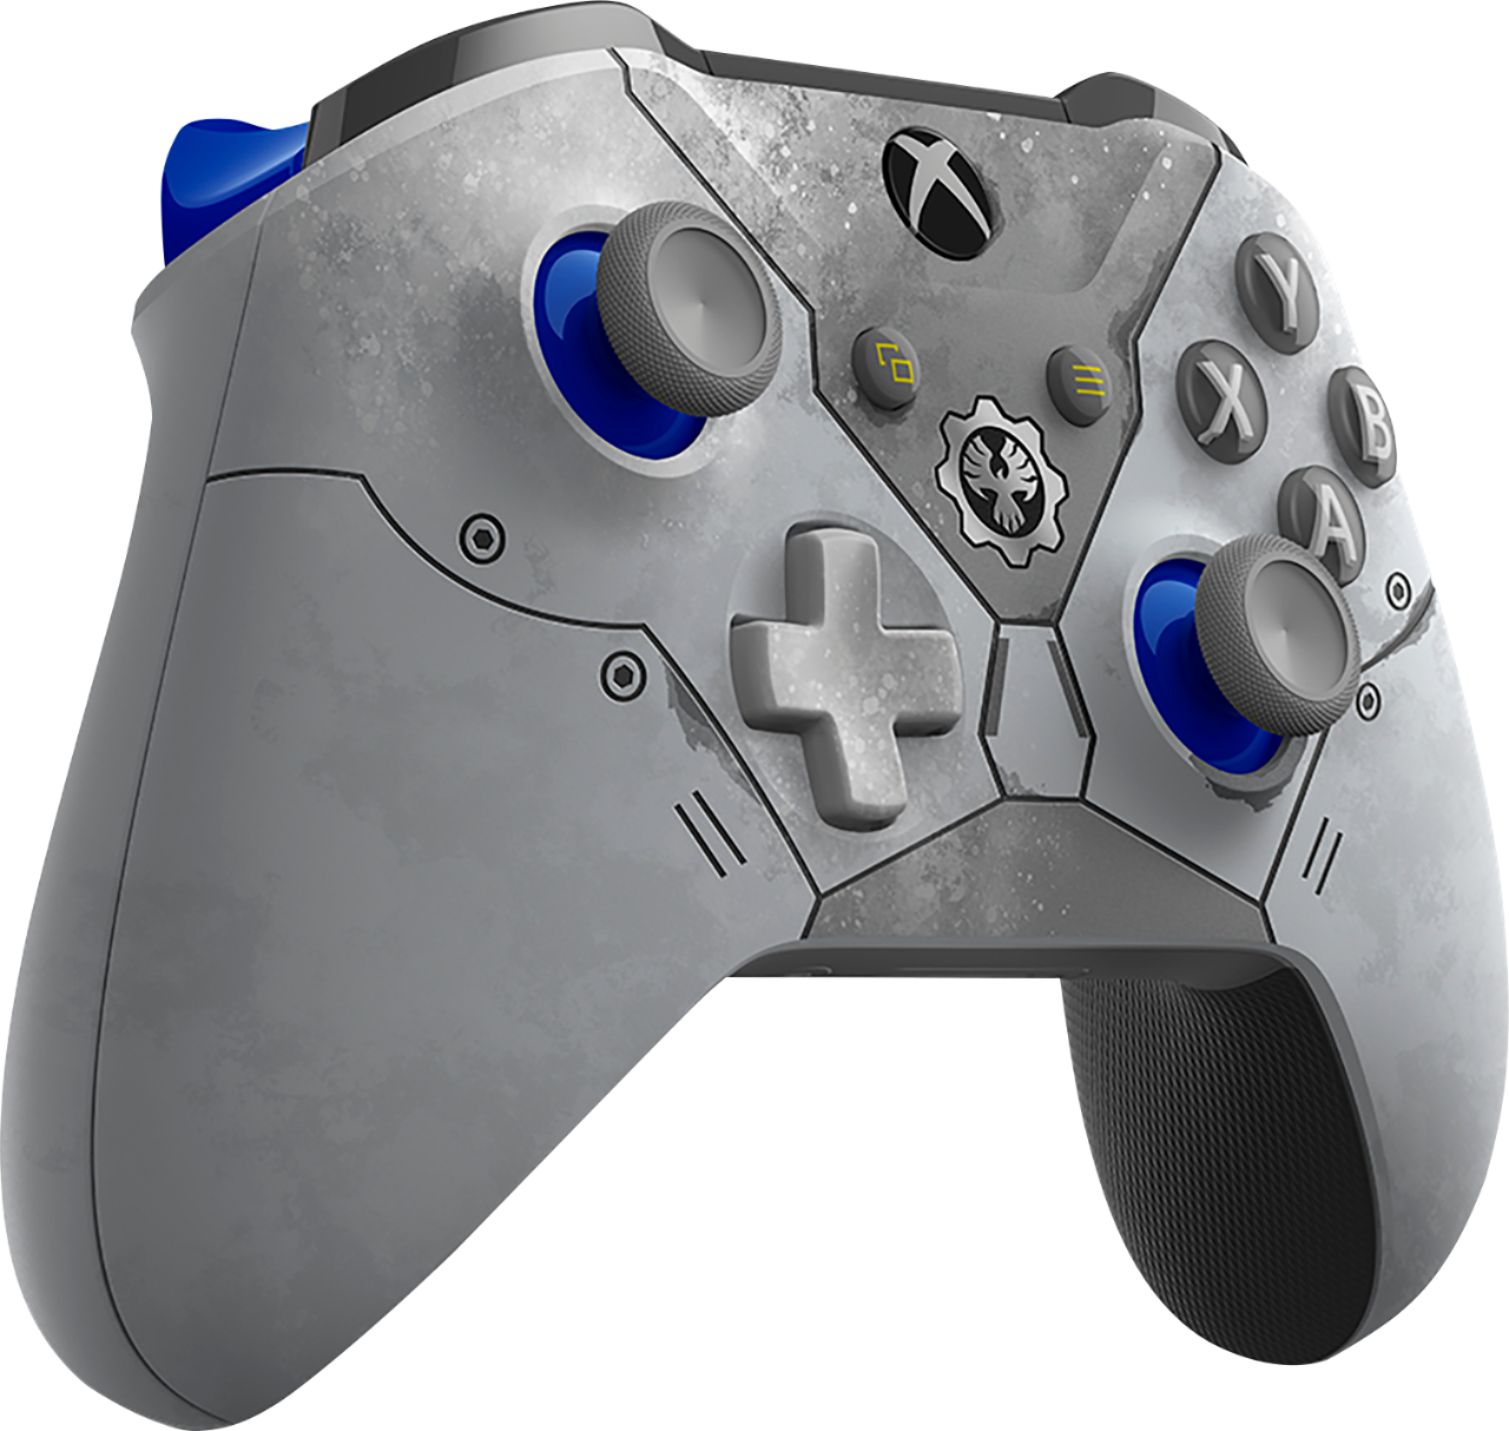 Angle View: Microsoft - Geek Squad Certified Refurbished Xbox Gears 5 Kait Diaz Limited Edition Wireless Controller for PC, Xbox One, One S & X - White